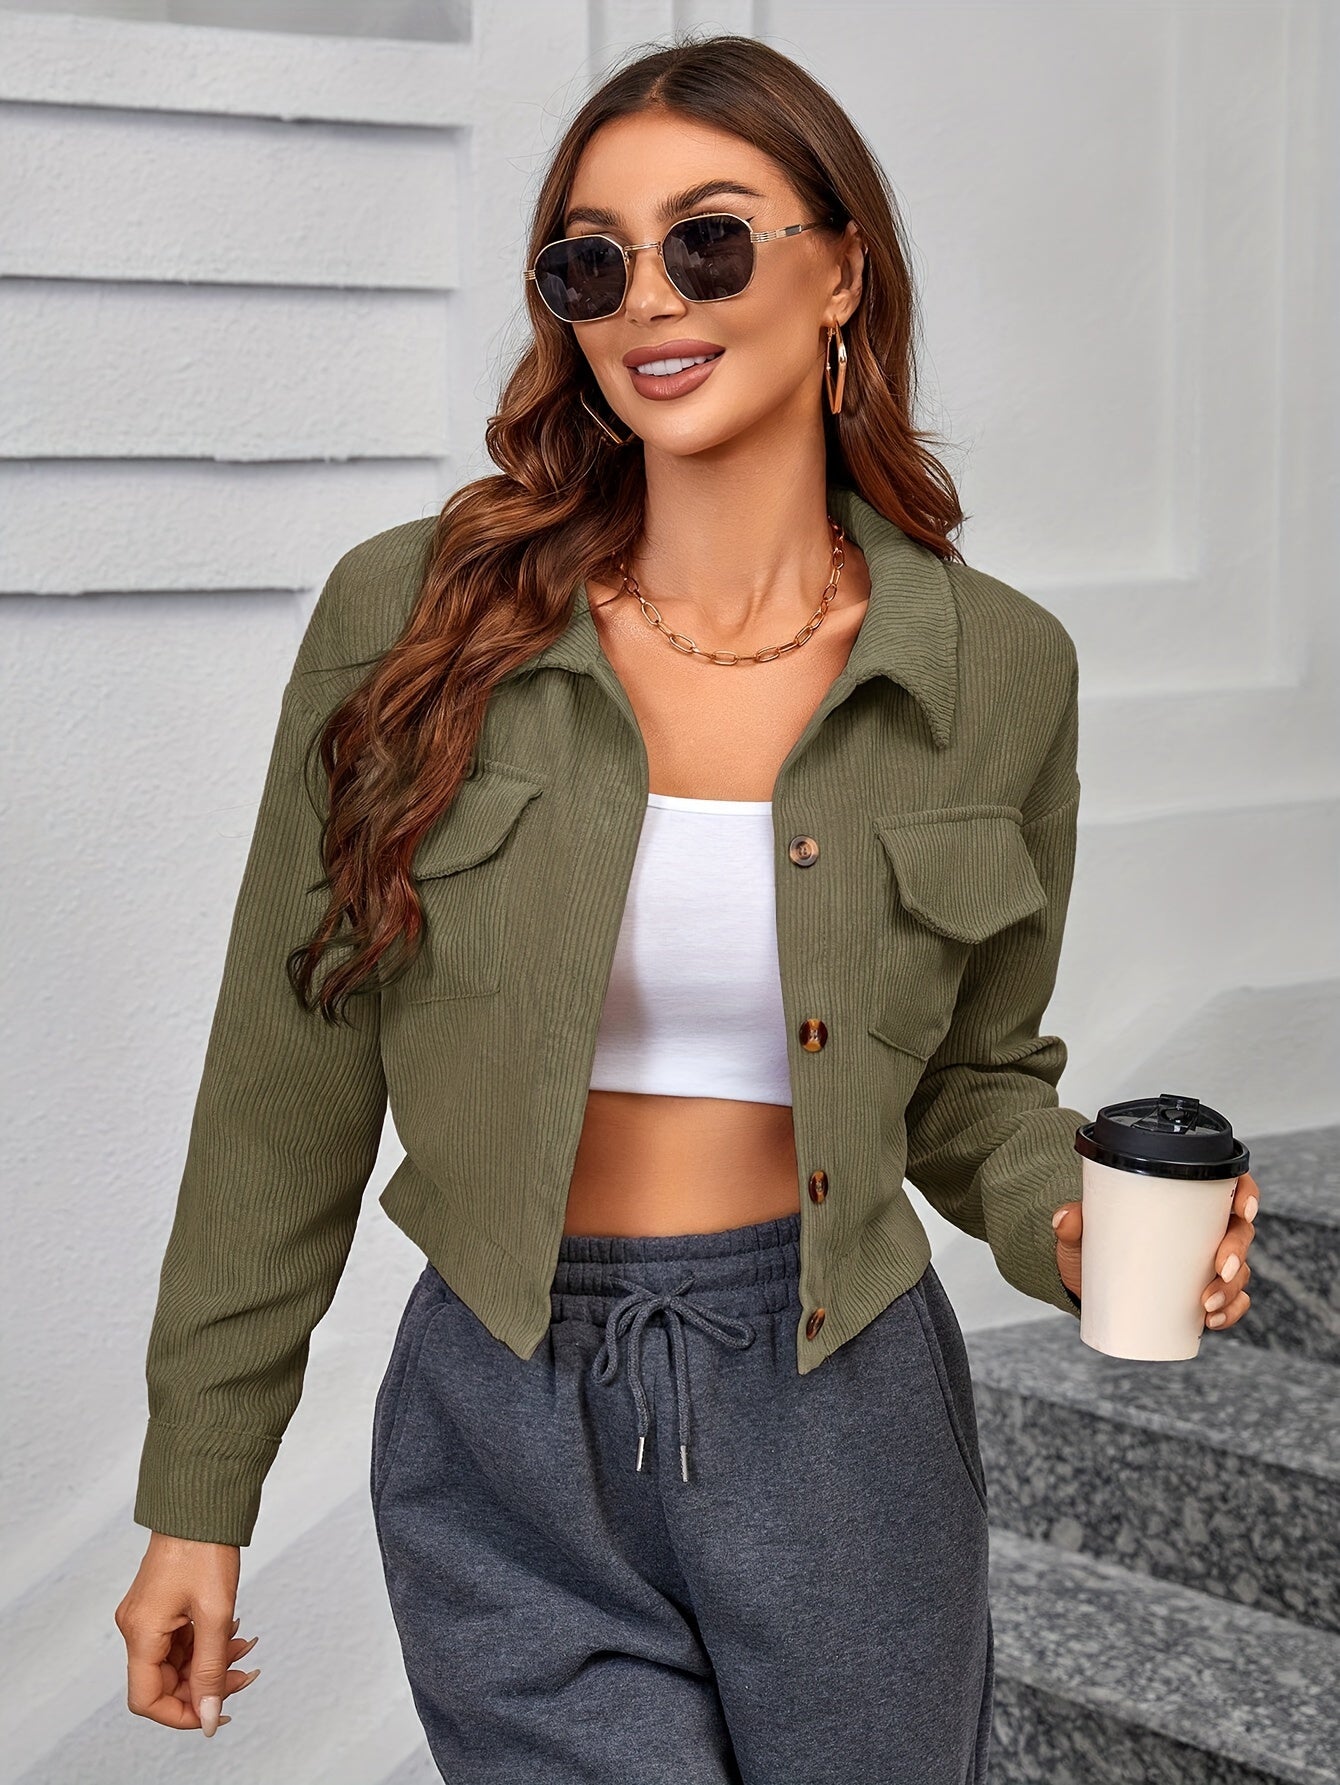 Vzyzv Corduroy Button Front Jacket, Casual Long Sleeve Outwear For Fall & Winter, Women's Clothing